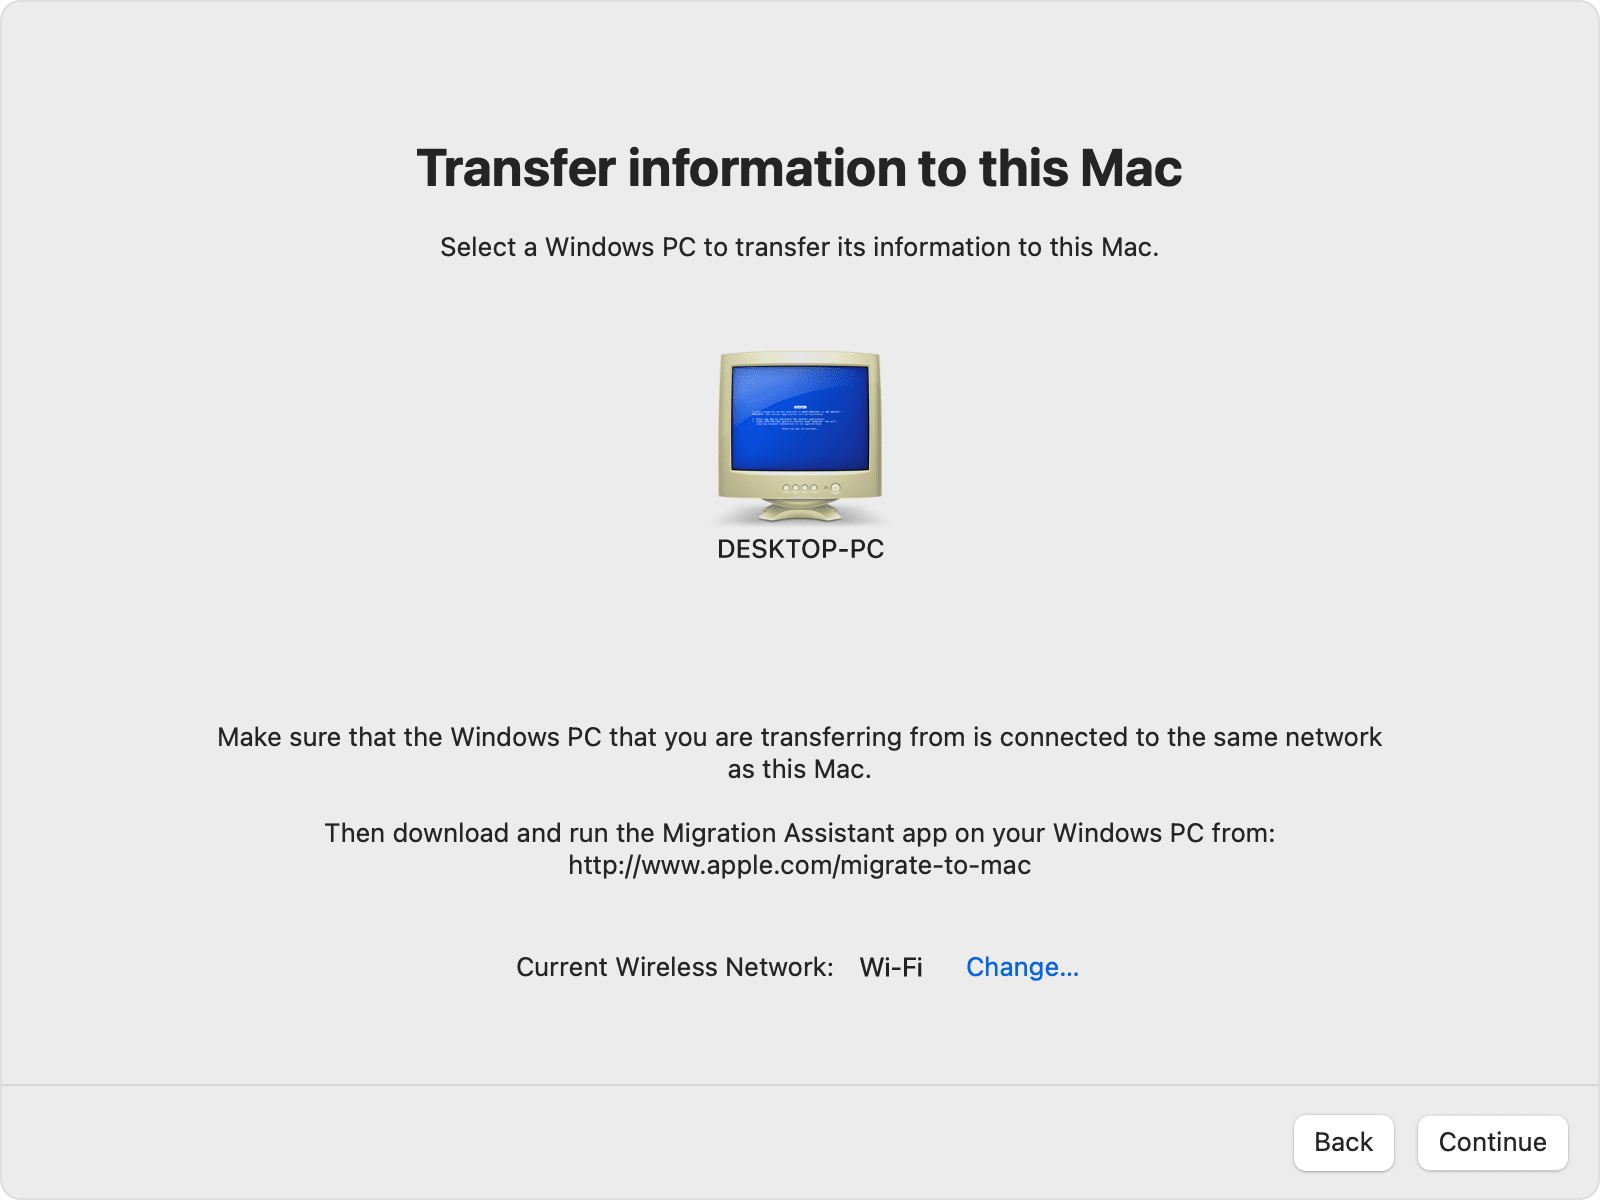 Migration Assistant on Mac: Select a Windows PC